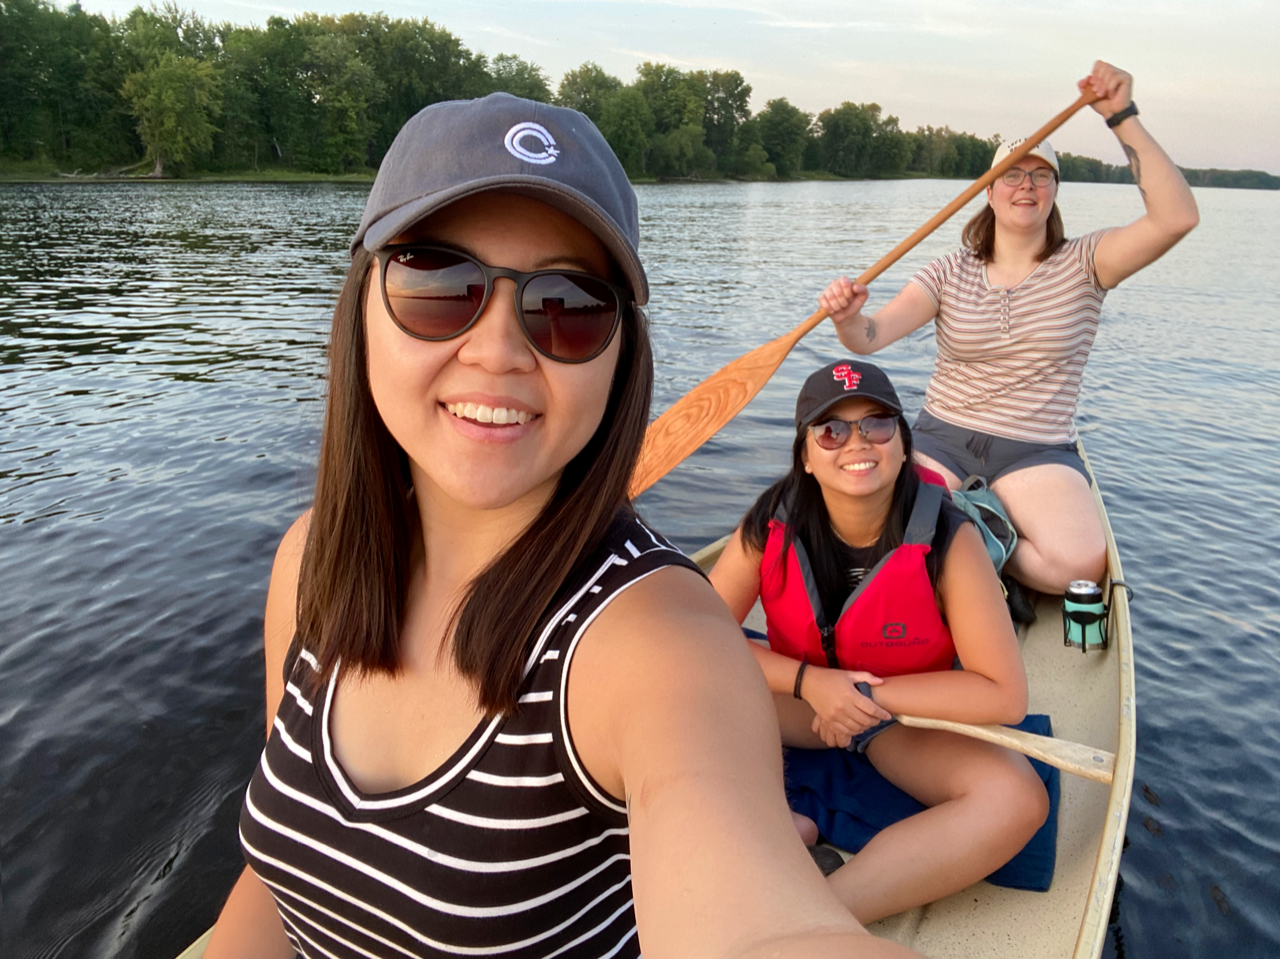 Michelle Liu (left) and Allie Kennington (right) and a good friend enjoy canoeing on the Ottawa River near Rockcliffe.